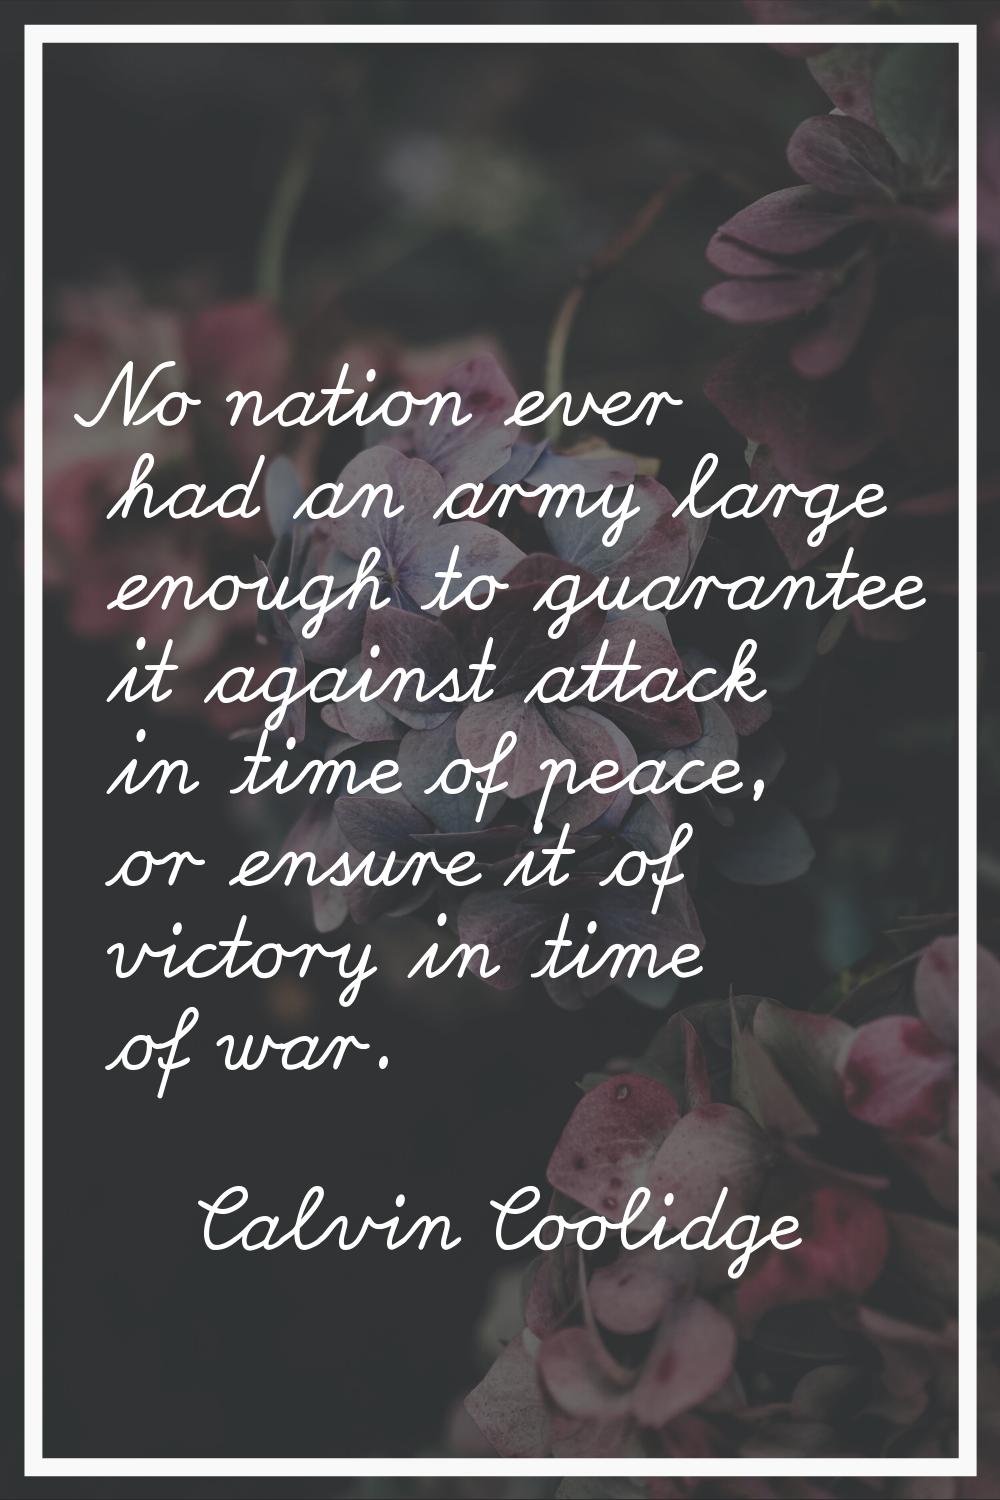 No nation ever had an army large enough to guarantee it against attack in time of peace, or ensure 